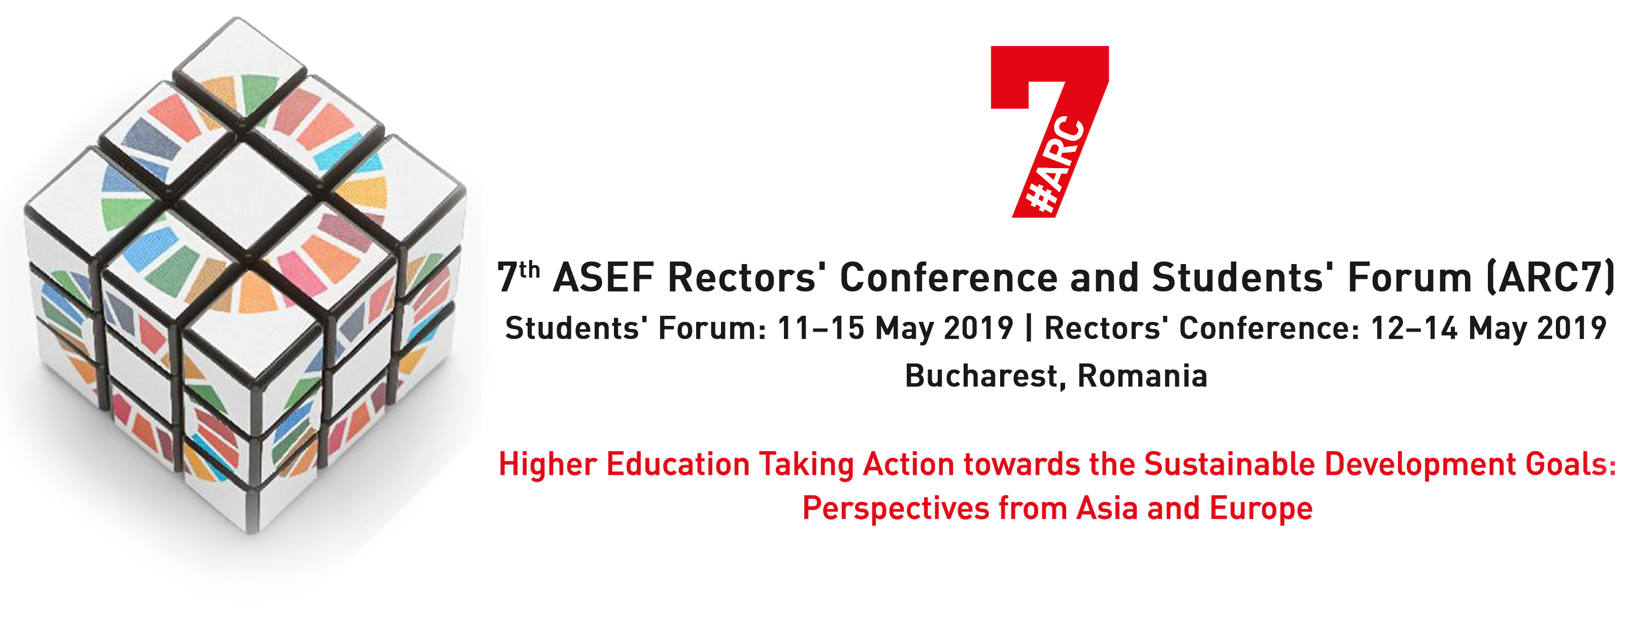 7th ASEF Rectors’ Conference and Students’ Forum (ARC7)